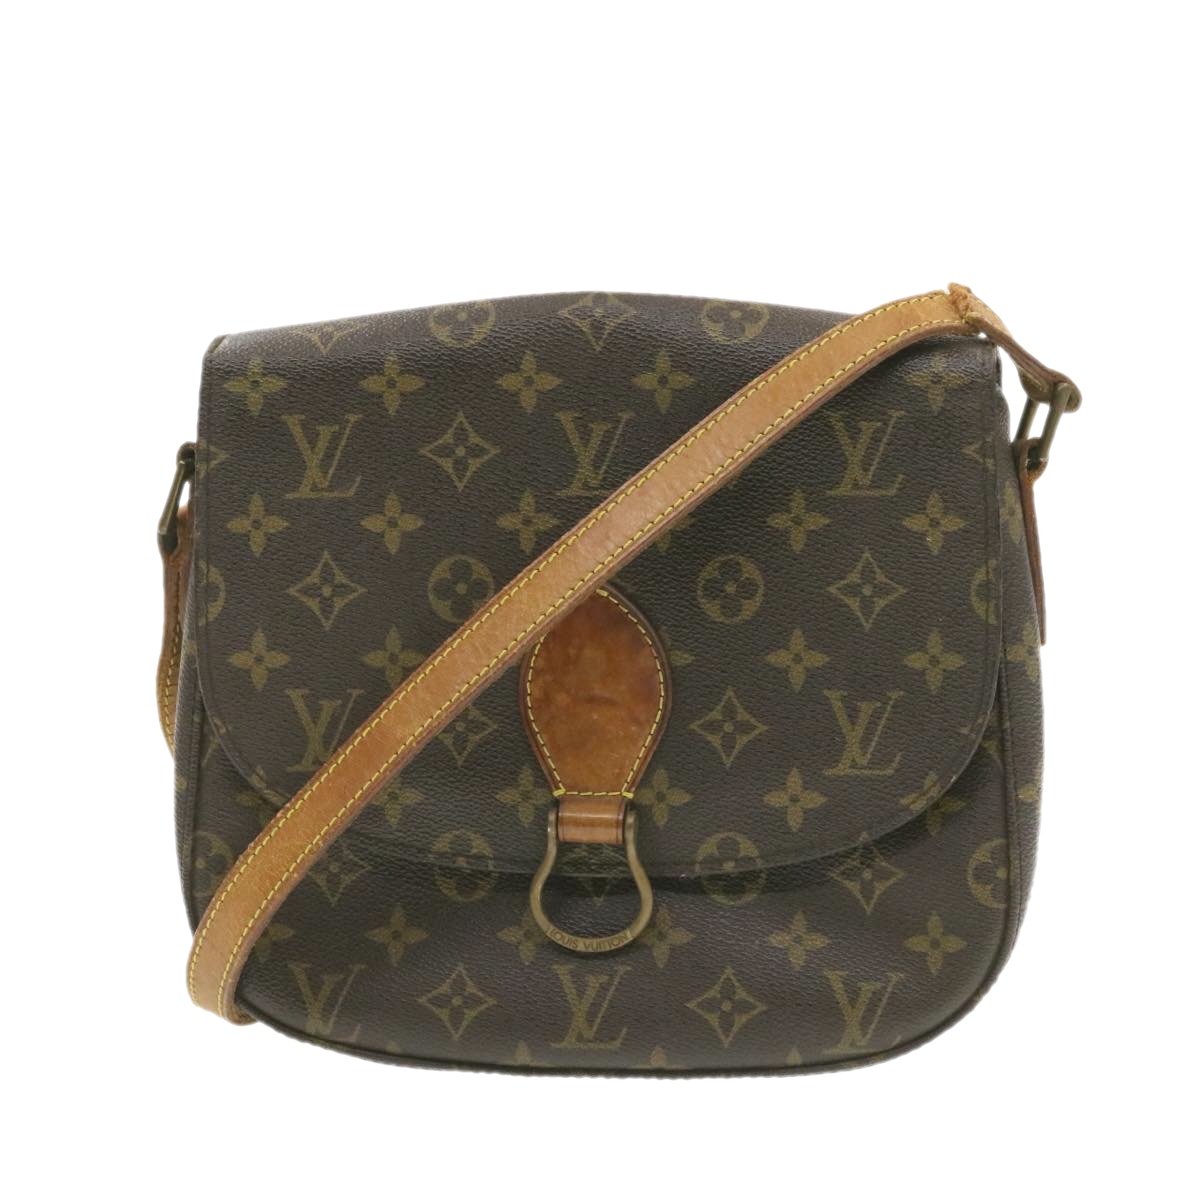 Louis Vuitton, Bags, Sold On Tradesy Louis Vuitton Twice Twinset